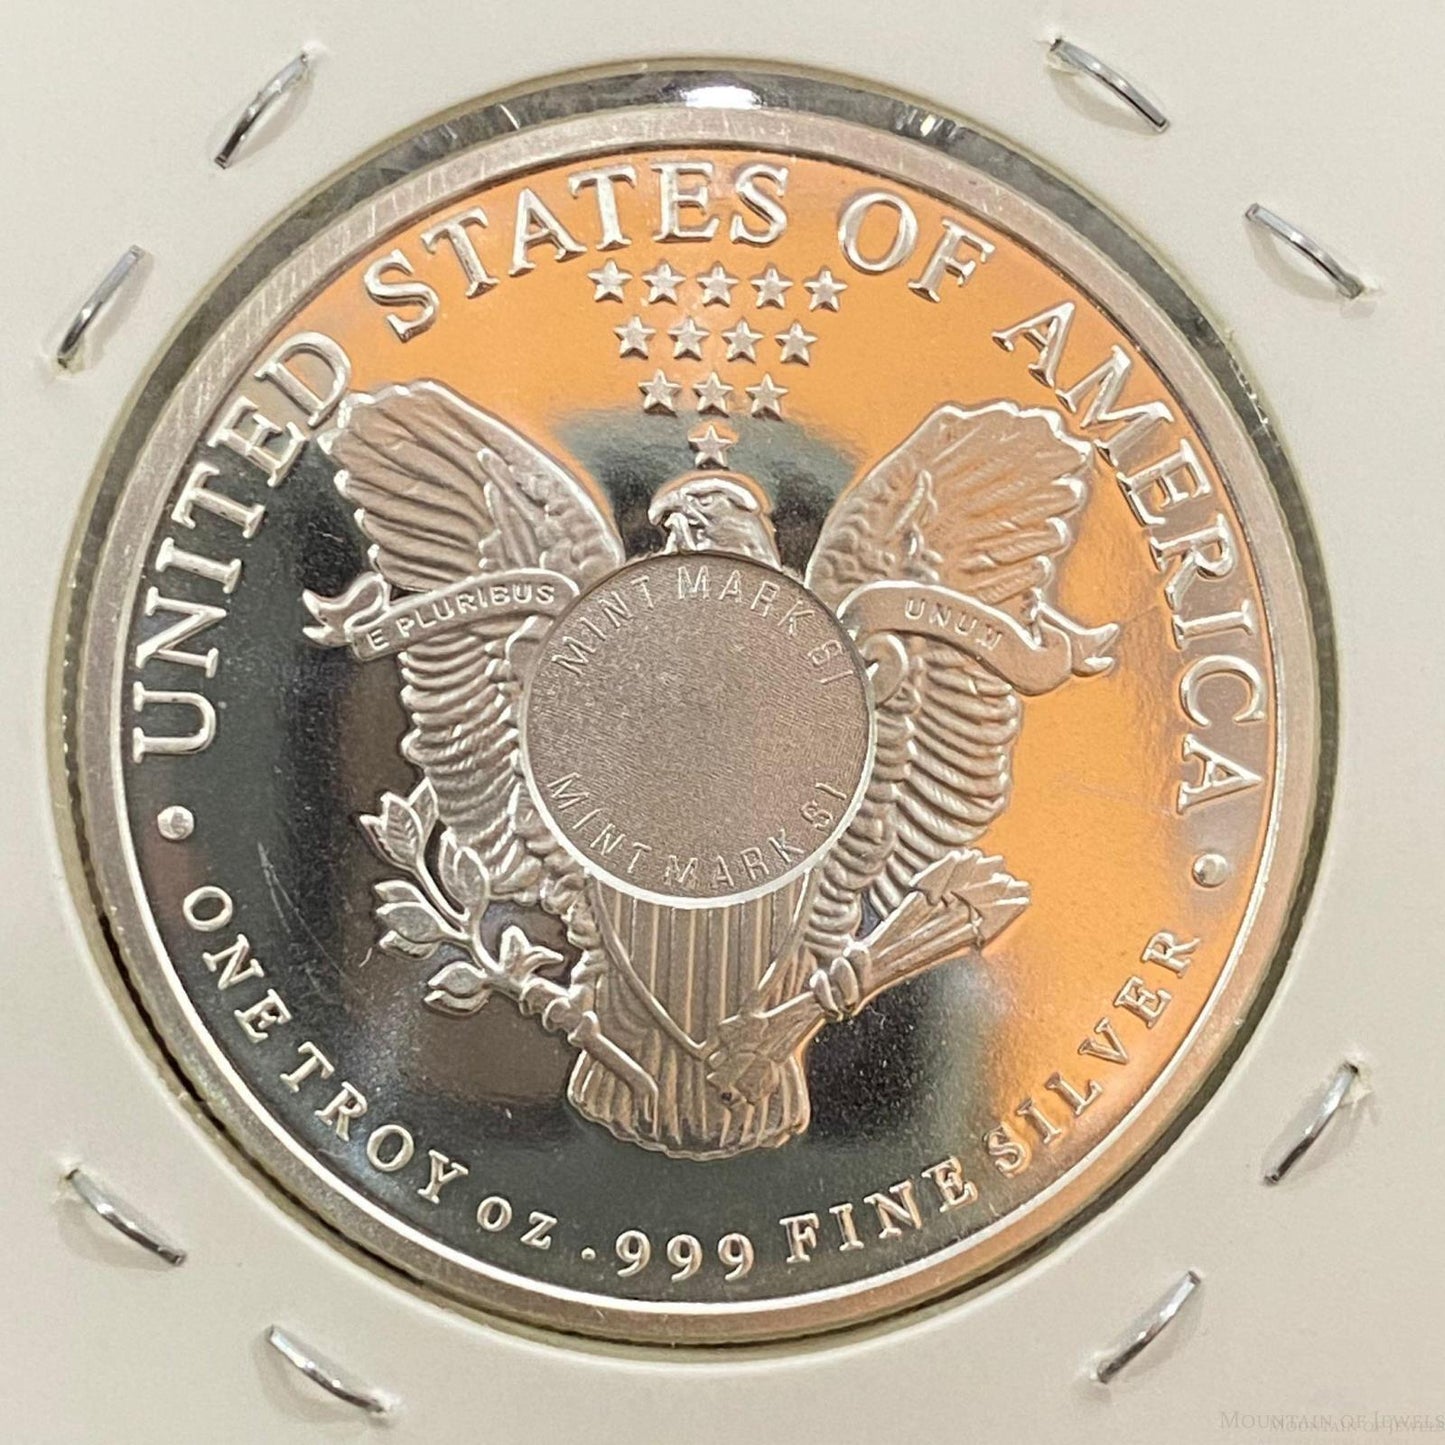 1.00 Ozt US Walking Liberty Design.999 Fine Silver Coin BU #51123-4OH